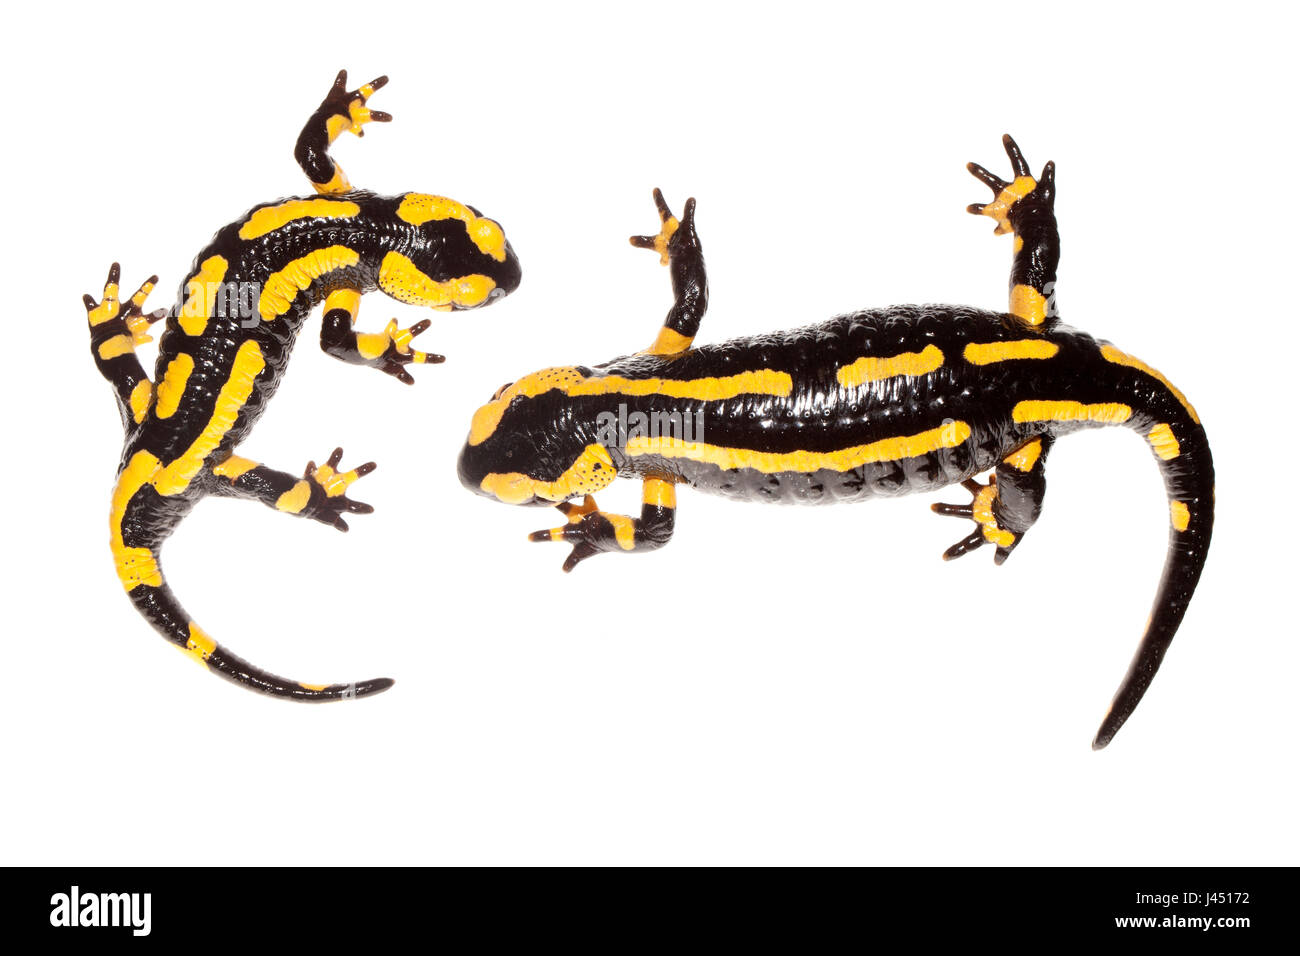 Fire salamanders photographed on a white background Stock Photo